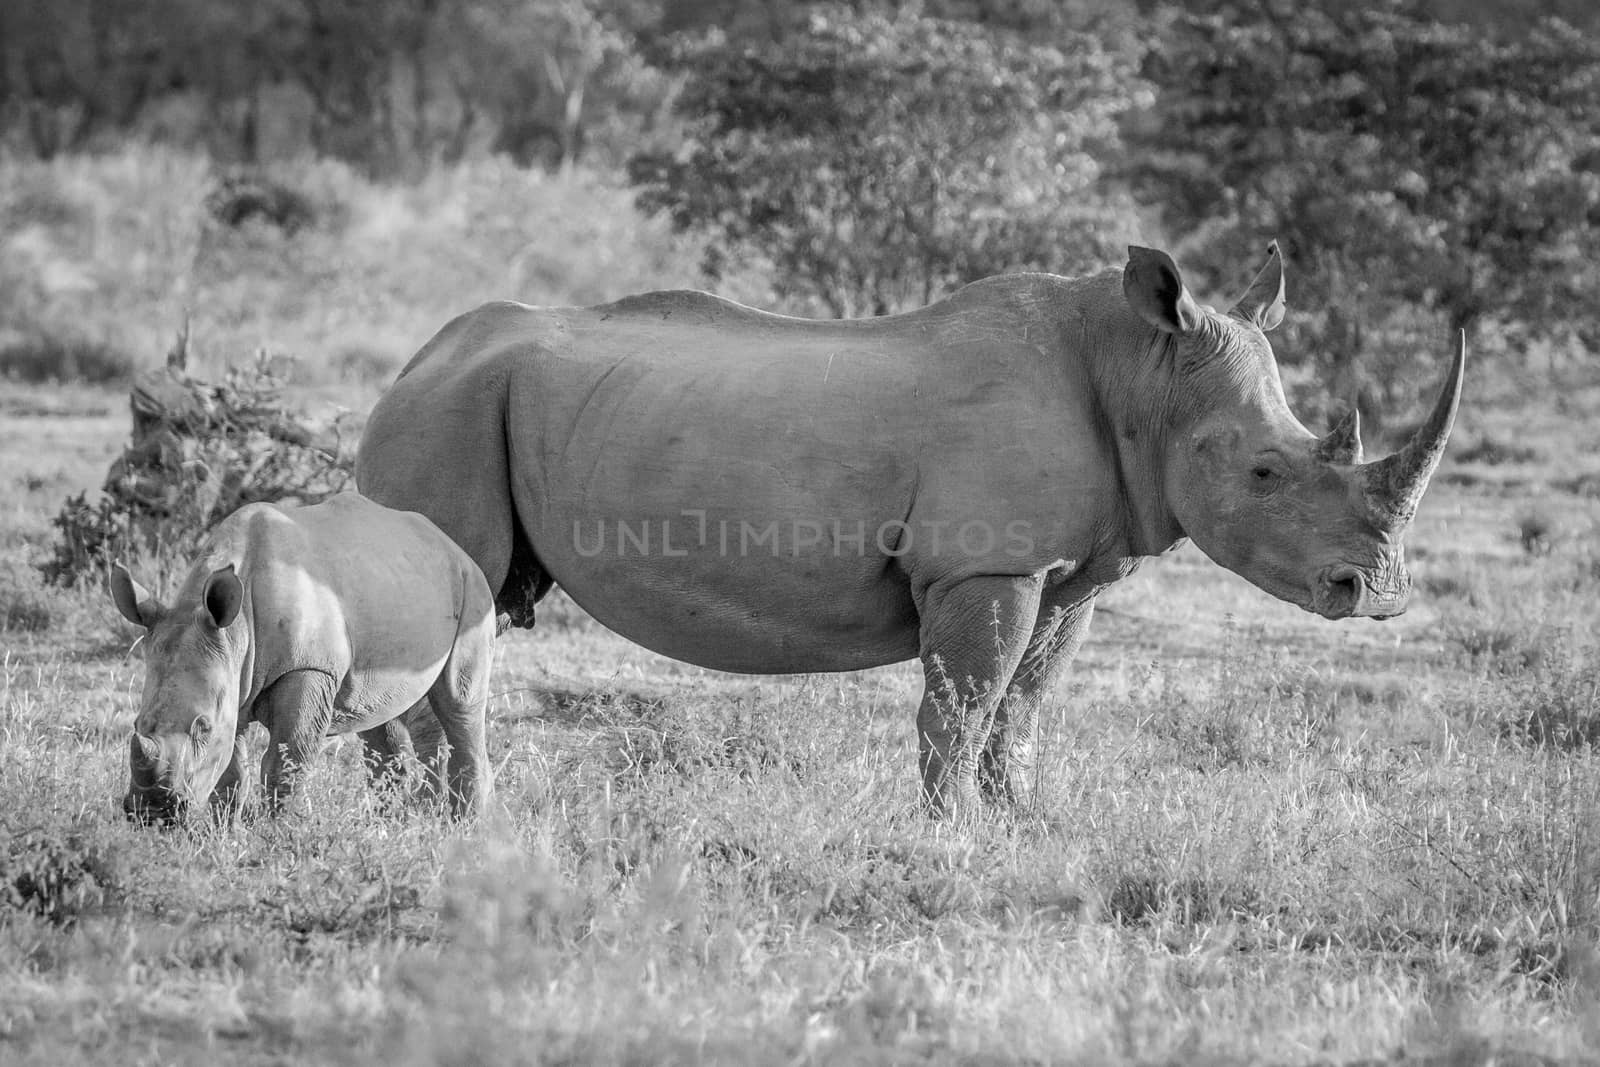 White rhino mother and baby calf standing in the grass in black and white, South Africa.